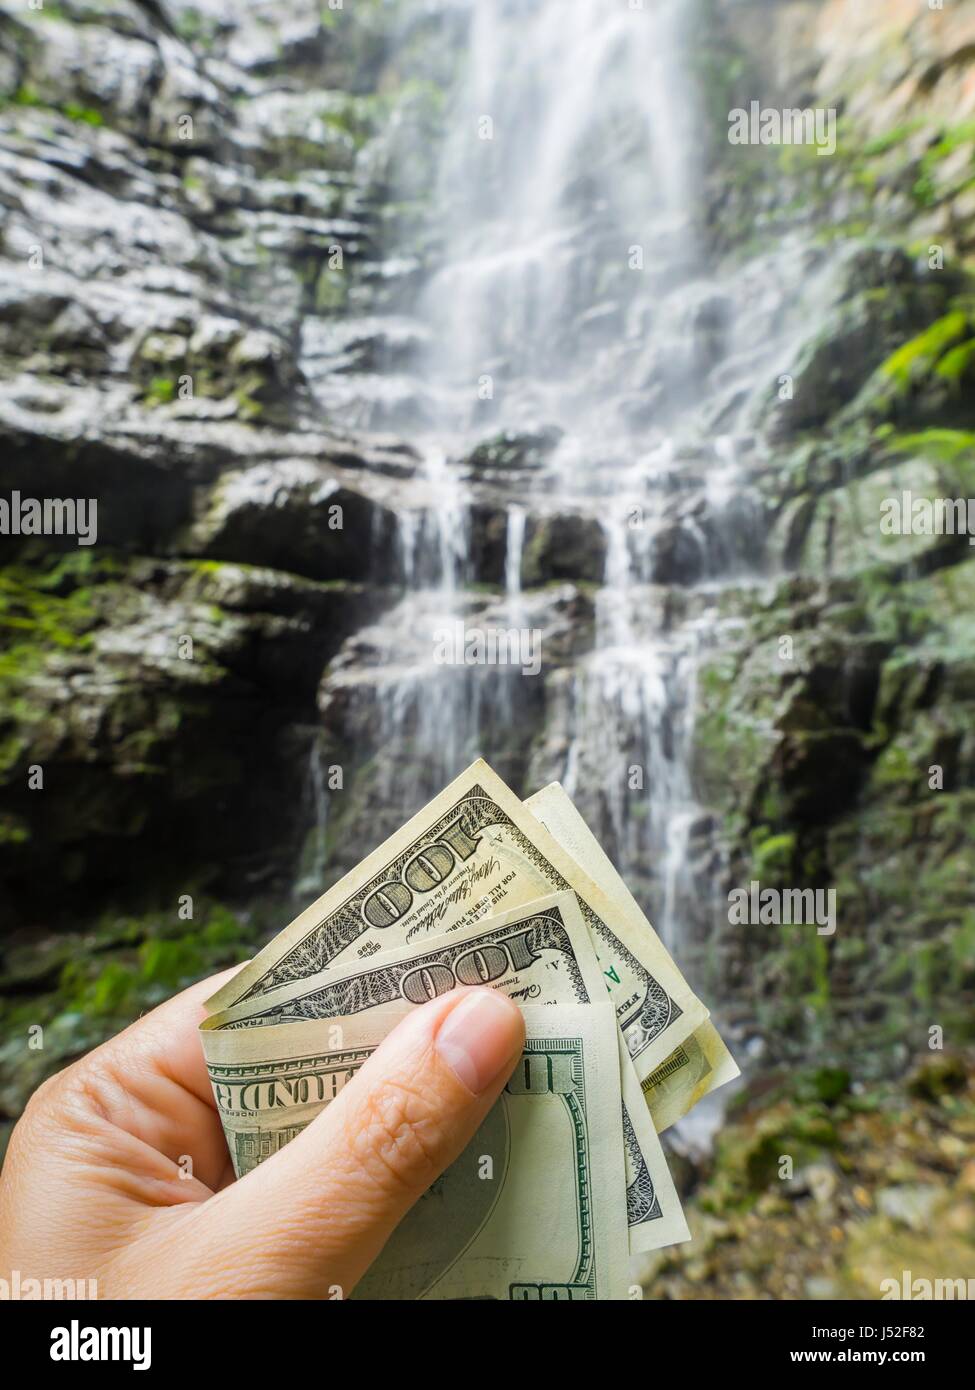 Fresh drinking water is expensive money in hand blurry background rocky terrain rocks value valuable free space price to pay pour pouring ownership Stock Photo